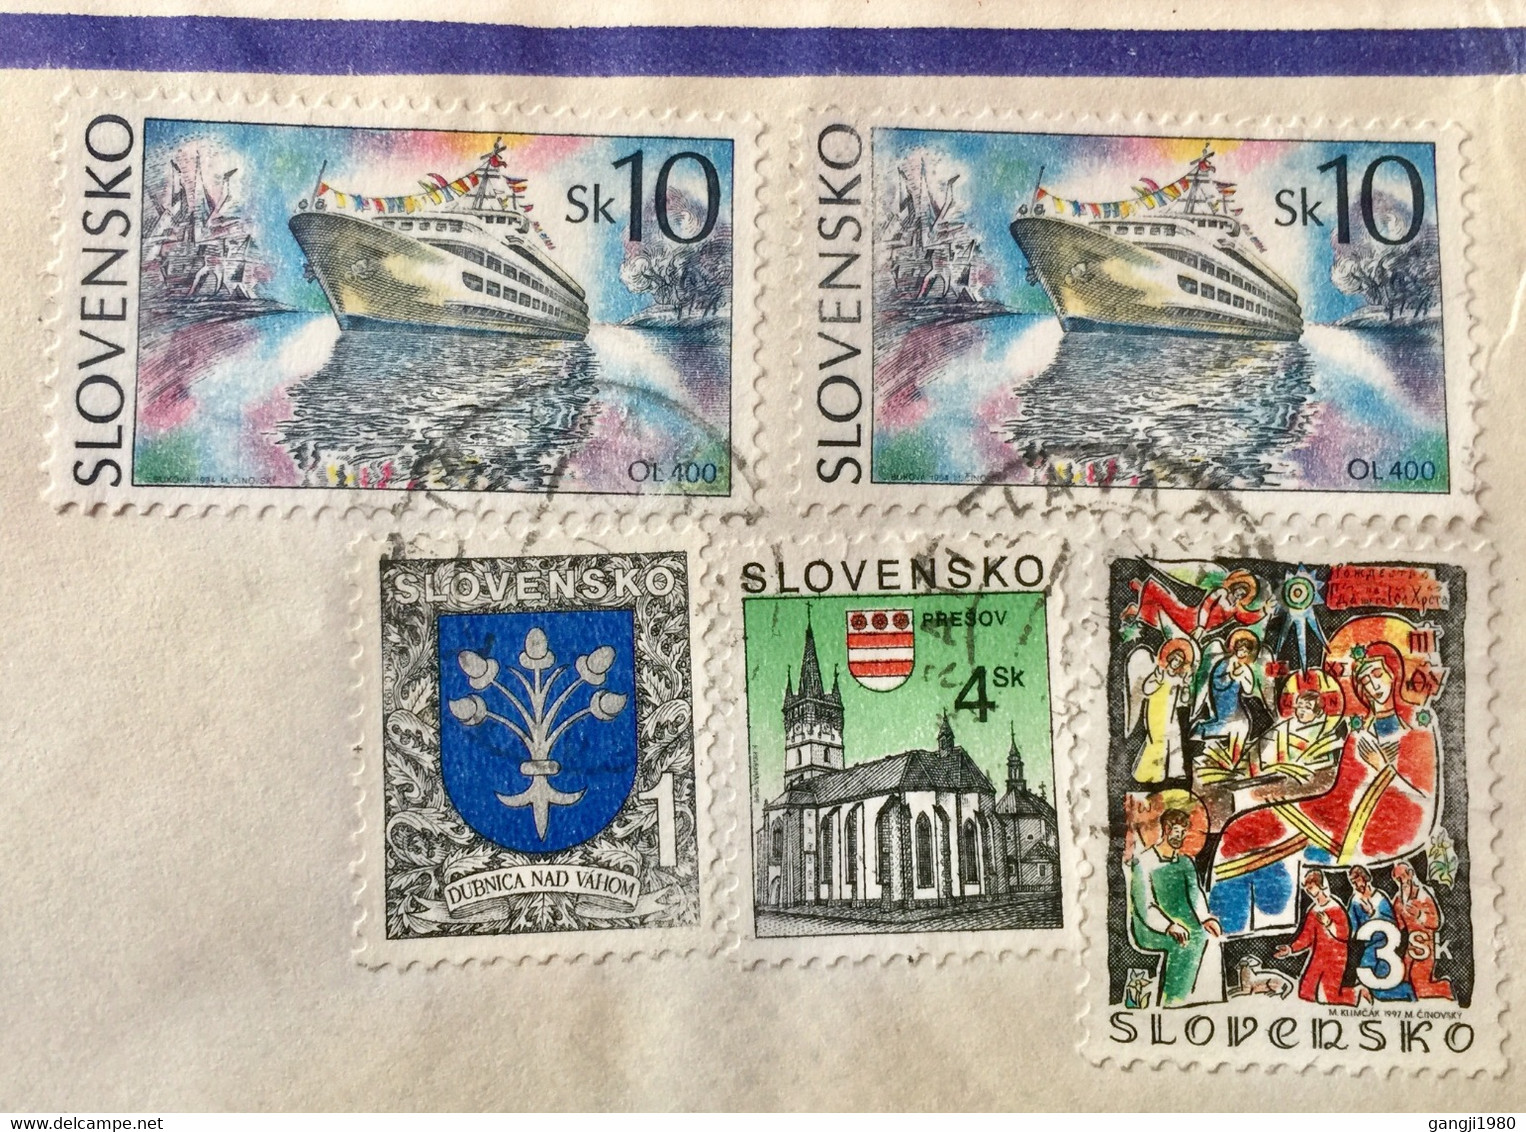 SLOVAKIA 2005, USED AIRMAIL COVER TO INDIA ,5 STAMPS 38SK RATE !SHIP, PRESOV,BUILDING,CHURCH,FAIRYTALES,ART ,PAINTING - Brieven En Documenten